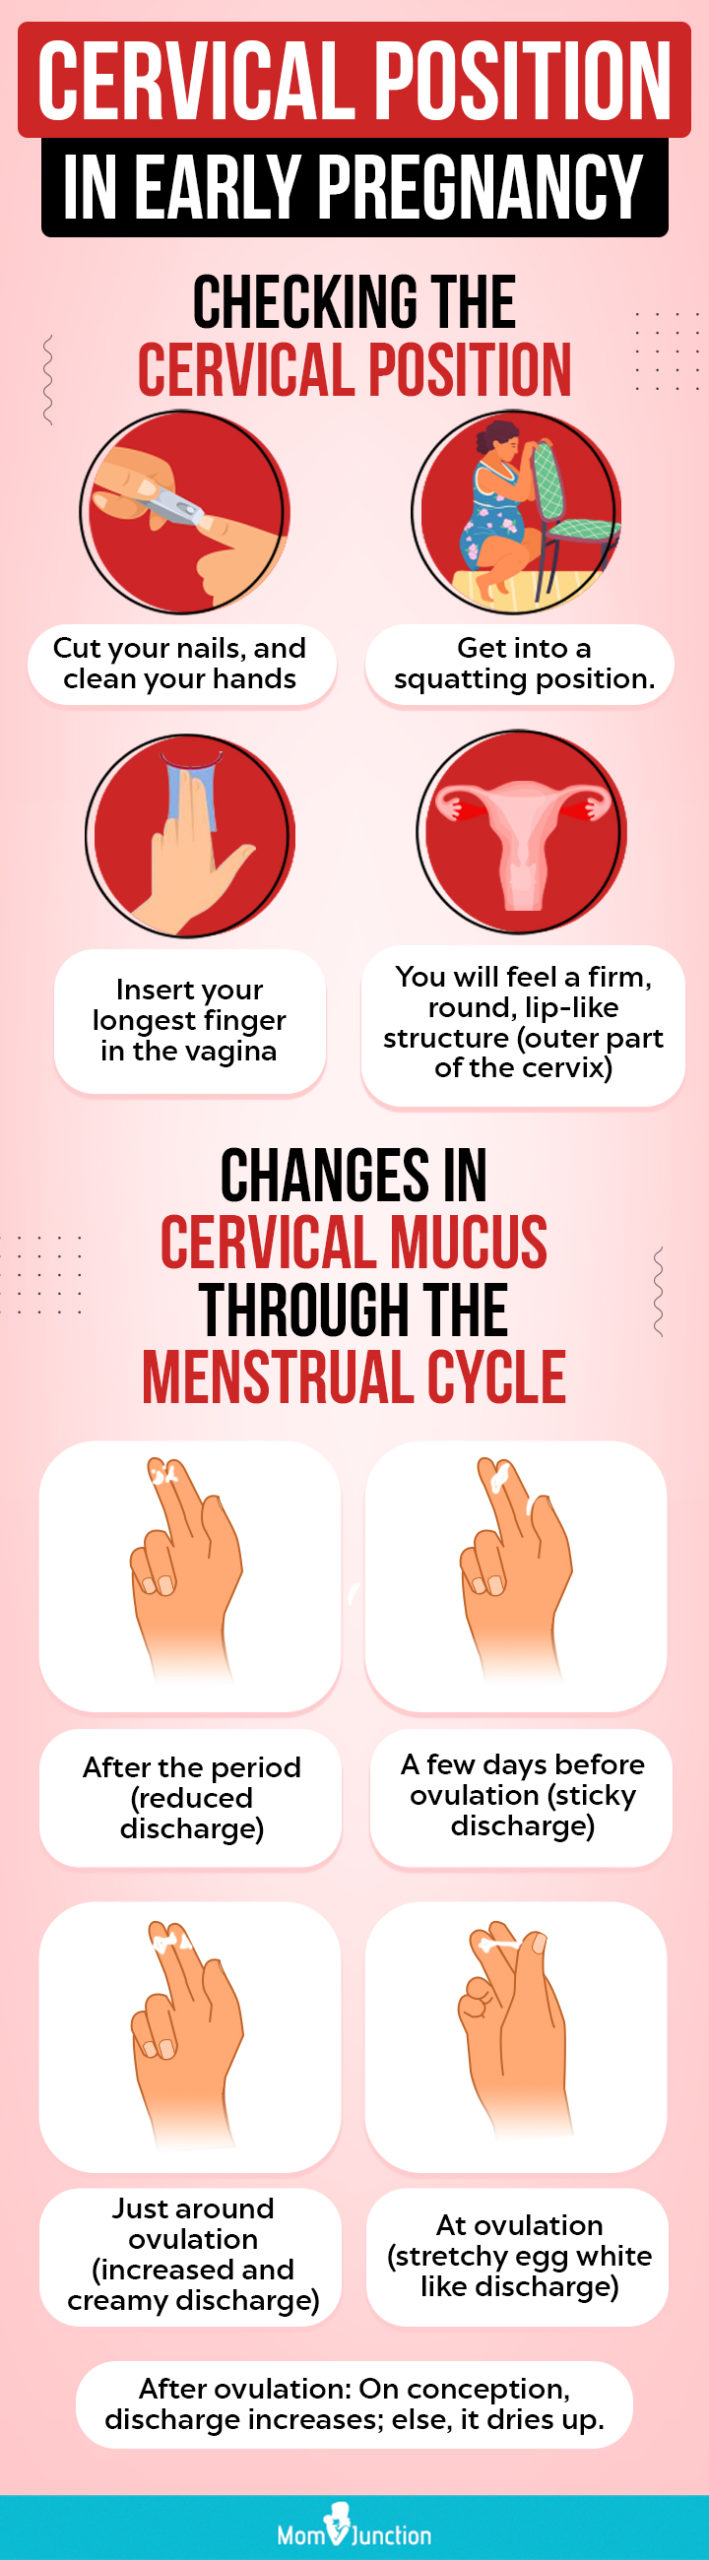 cervical position in early pregnancy (Infographic)